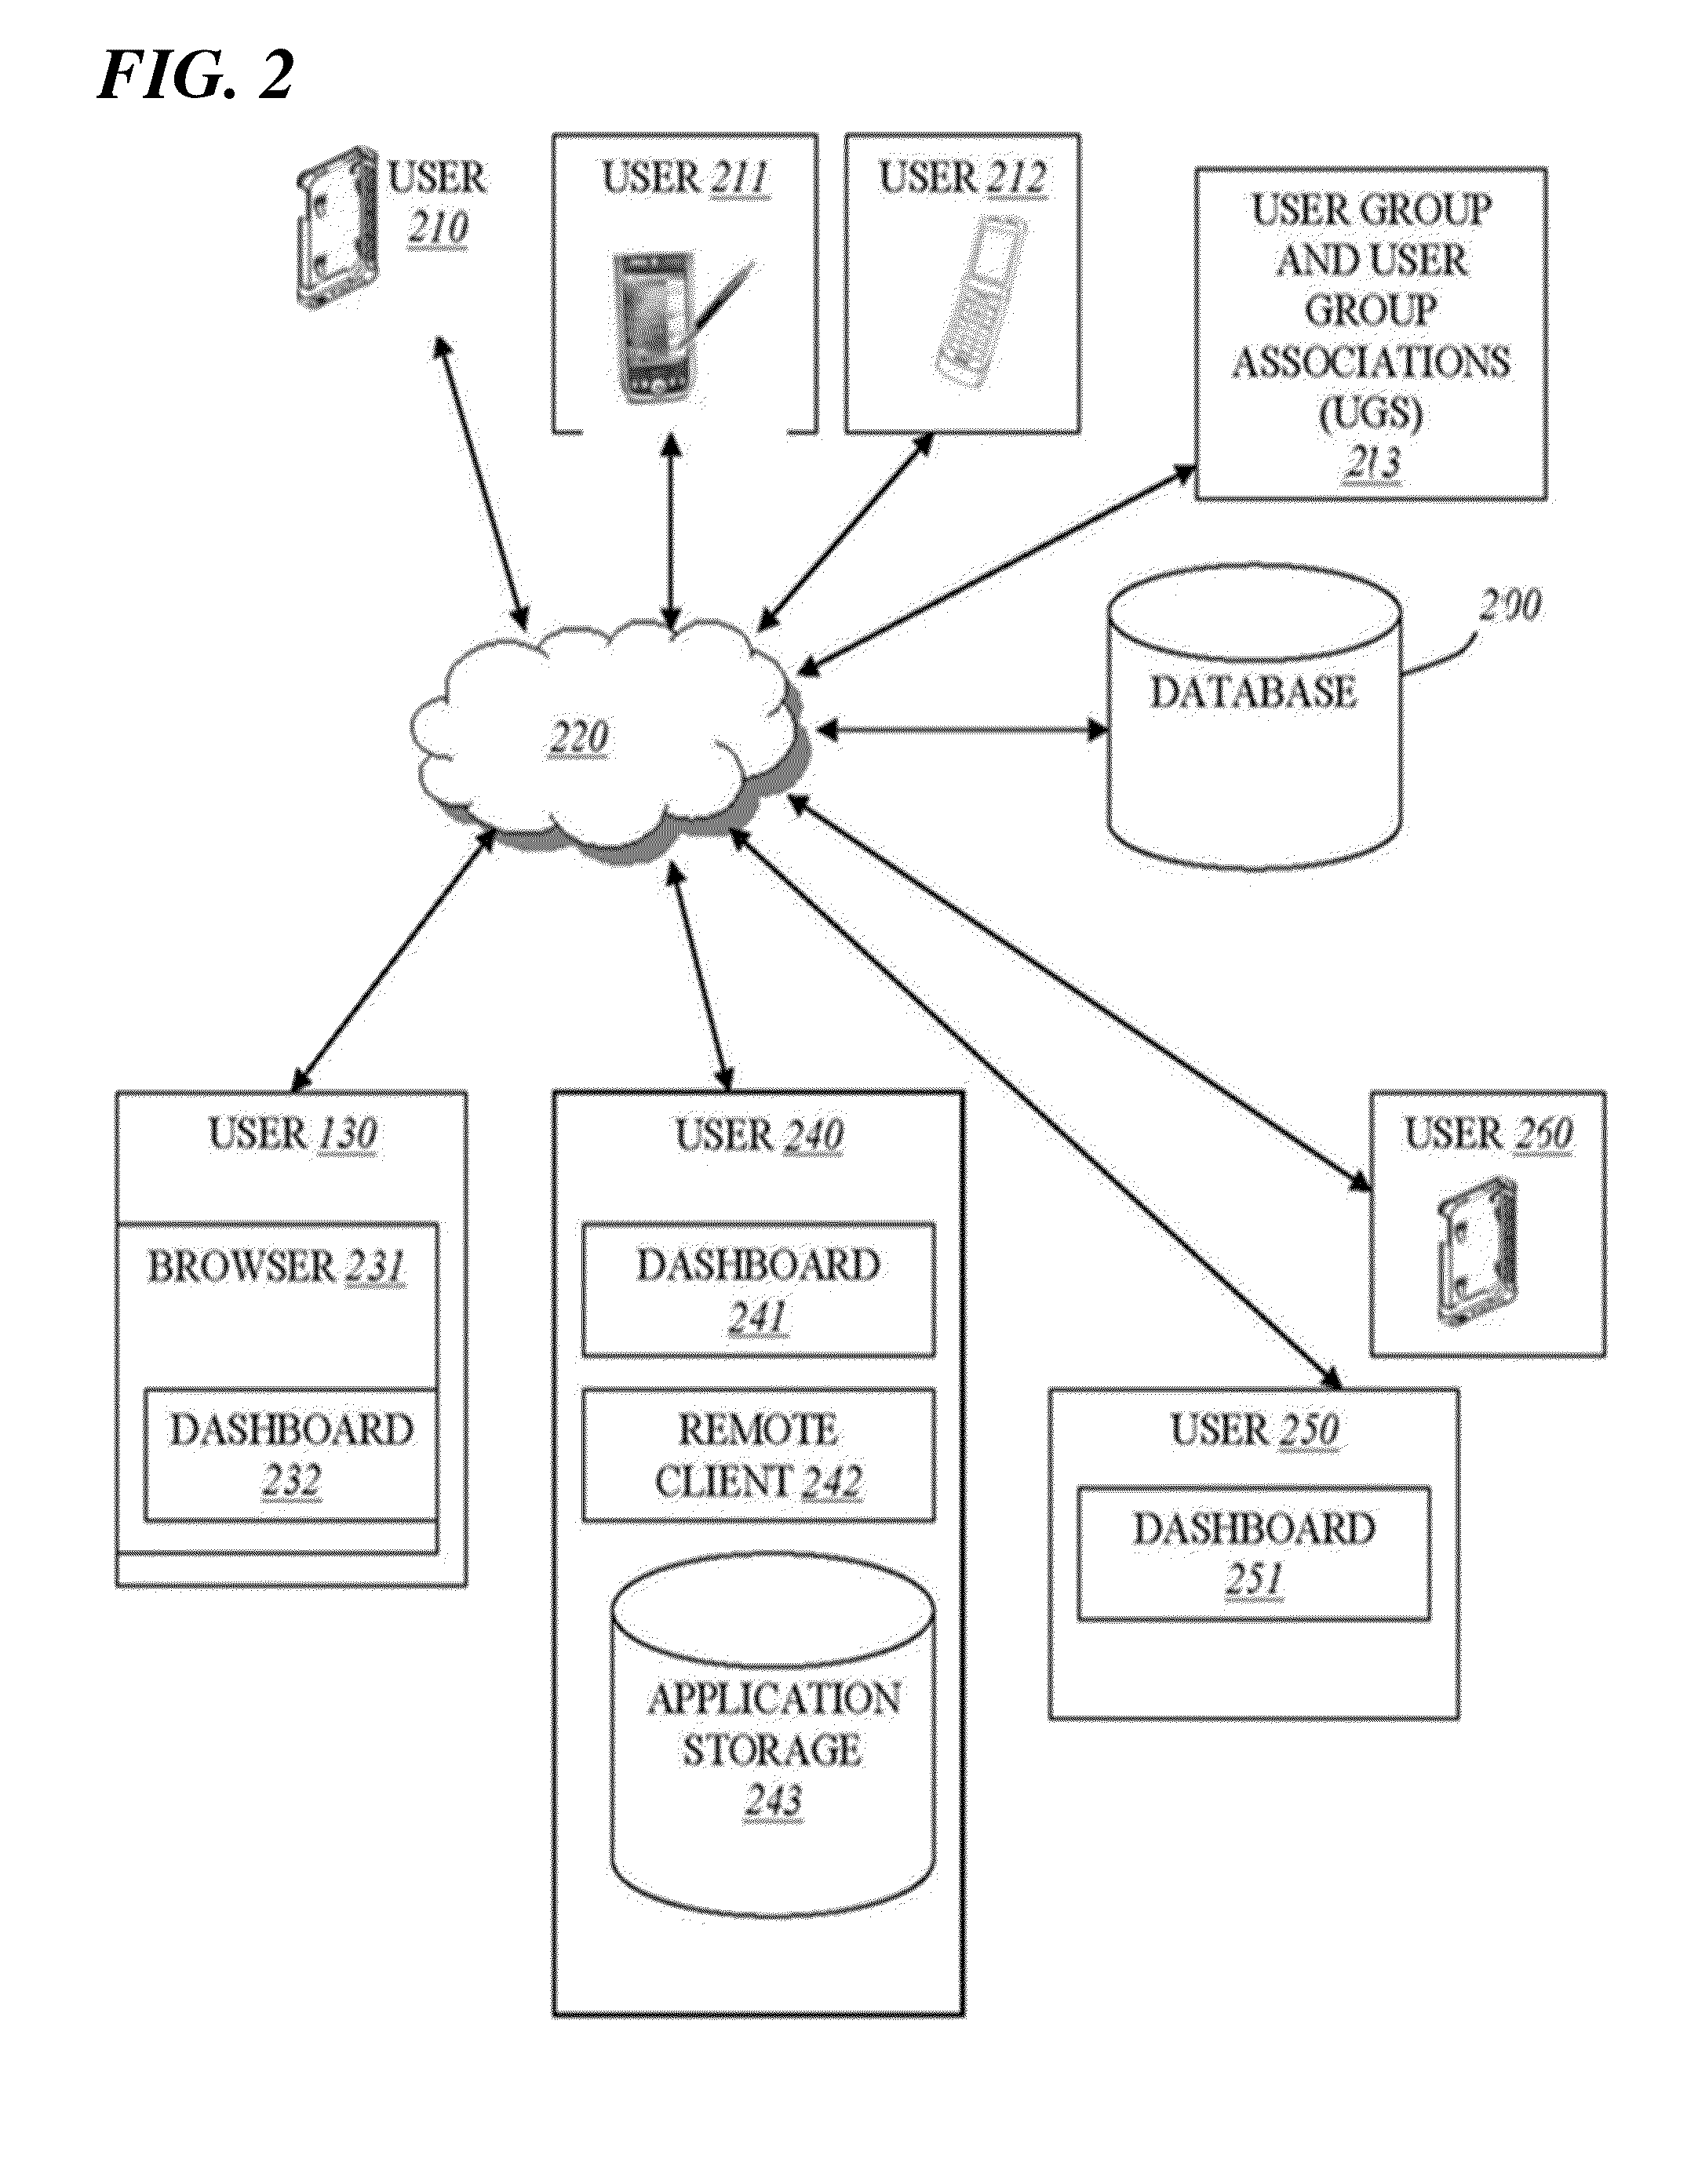 Enhanced detachable sensory-interface device for a wireless personal communication device and method